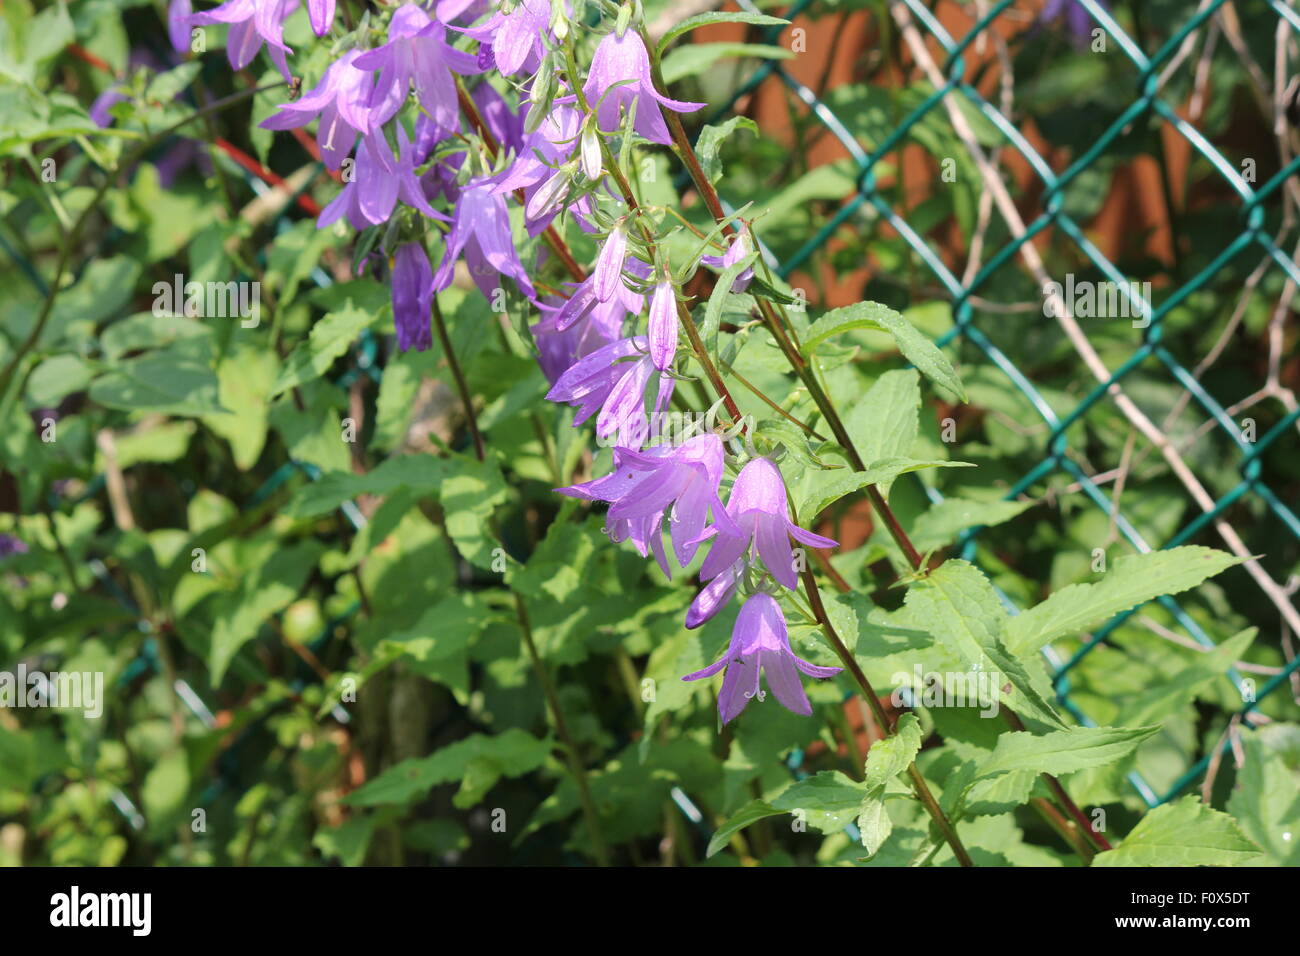 Creeping Bellflower (Campanula rapunculoides), pretty purple-violet invasive weed, bell shaped flower climbing a fence Stock Photo